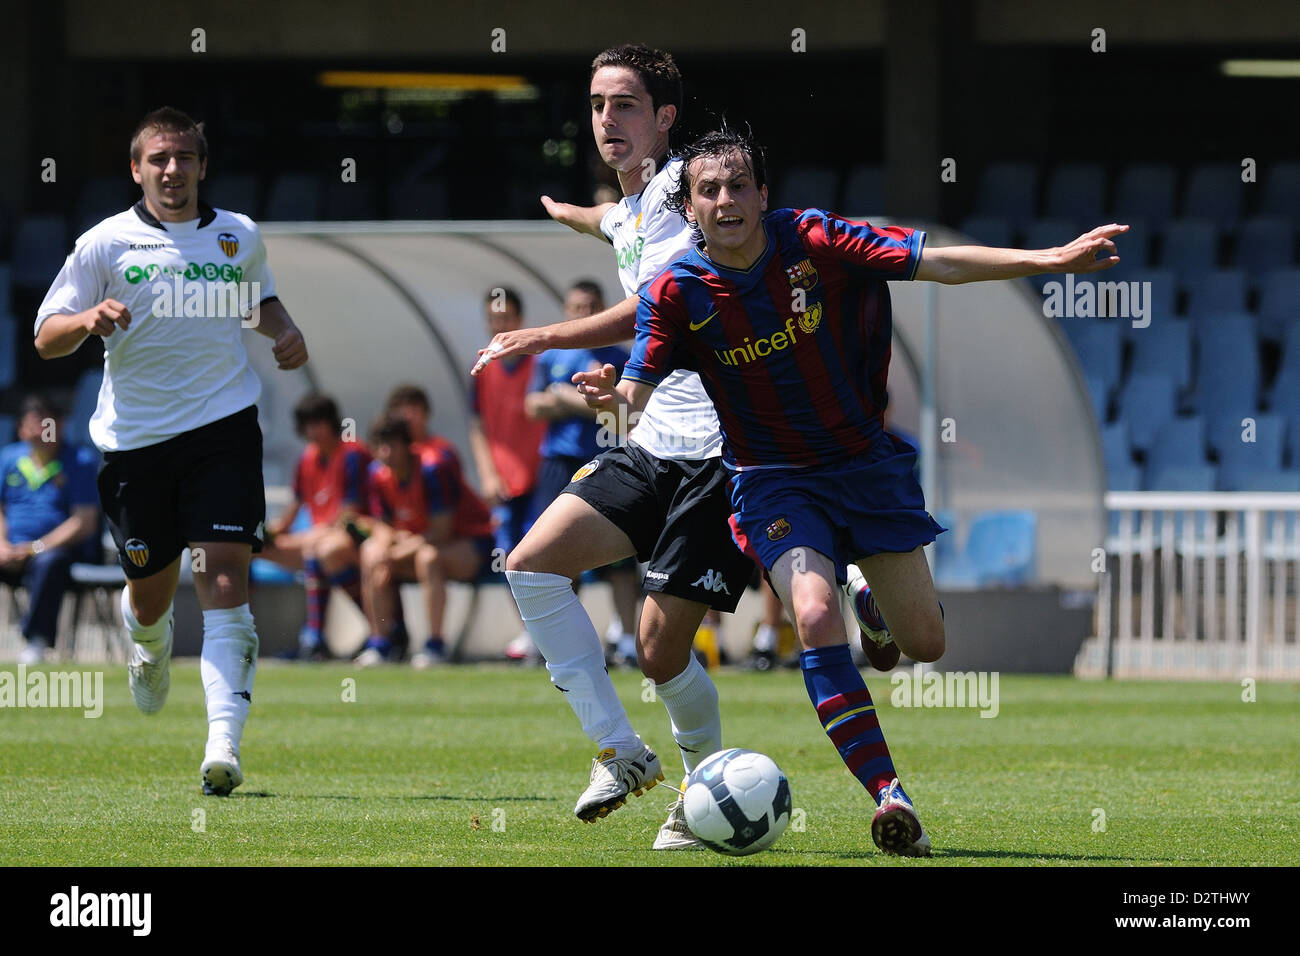 BARCELONA, SPAIN - MAY 23: Espinosa plays with F.C Barcelona youth team against Valencia C.F. 2010. Stock Photo